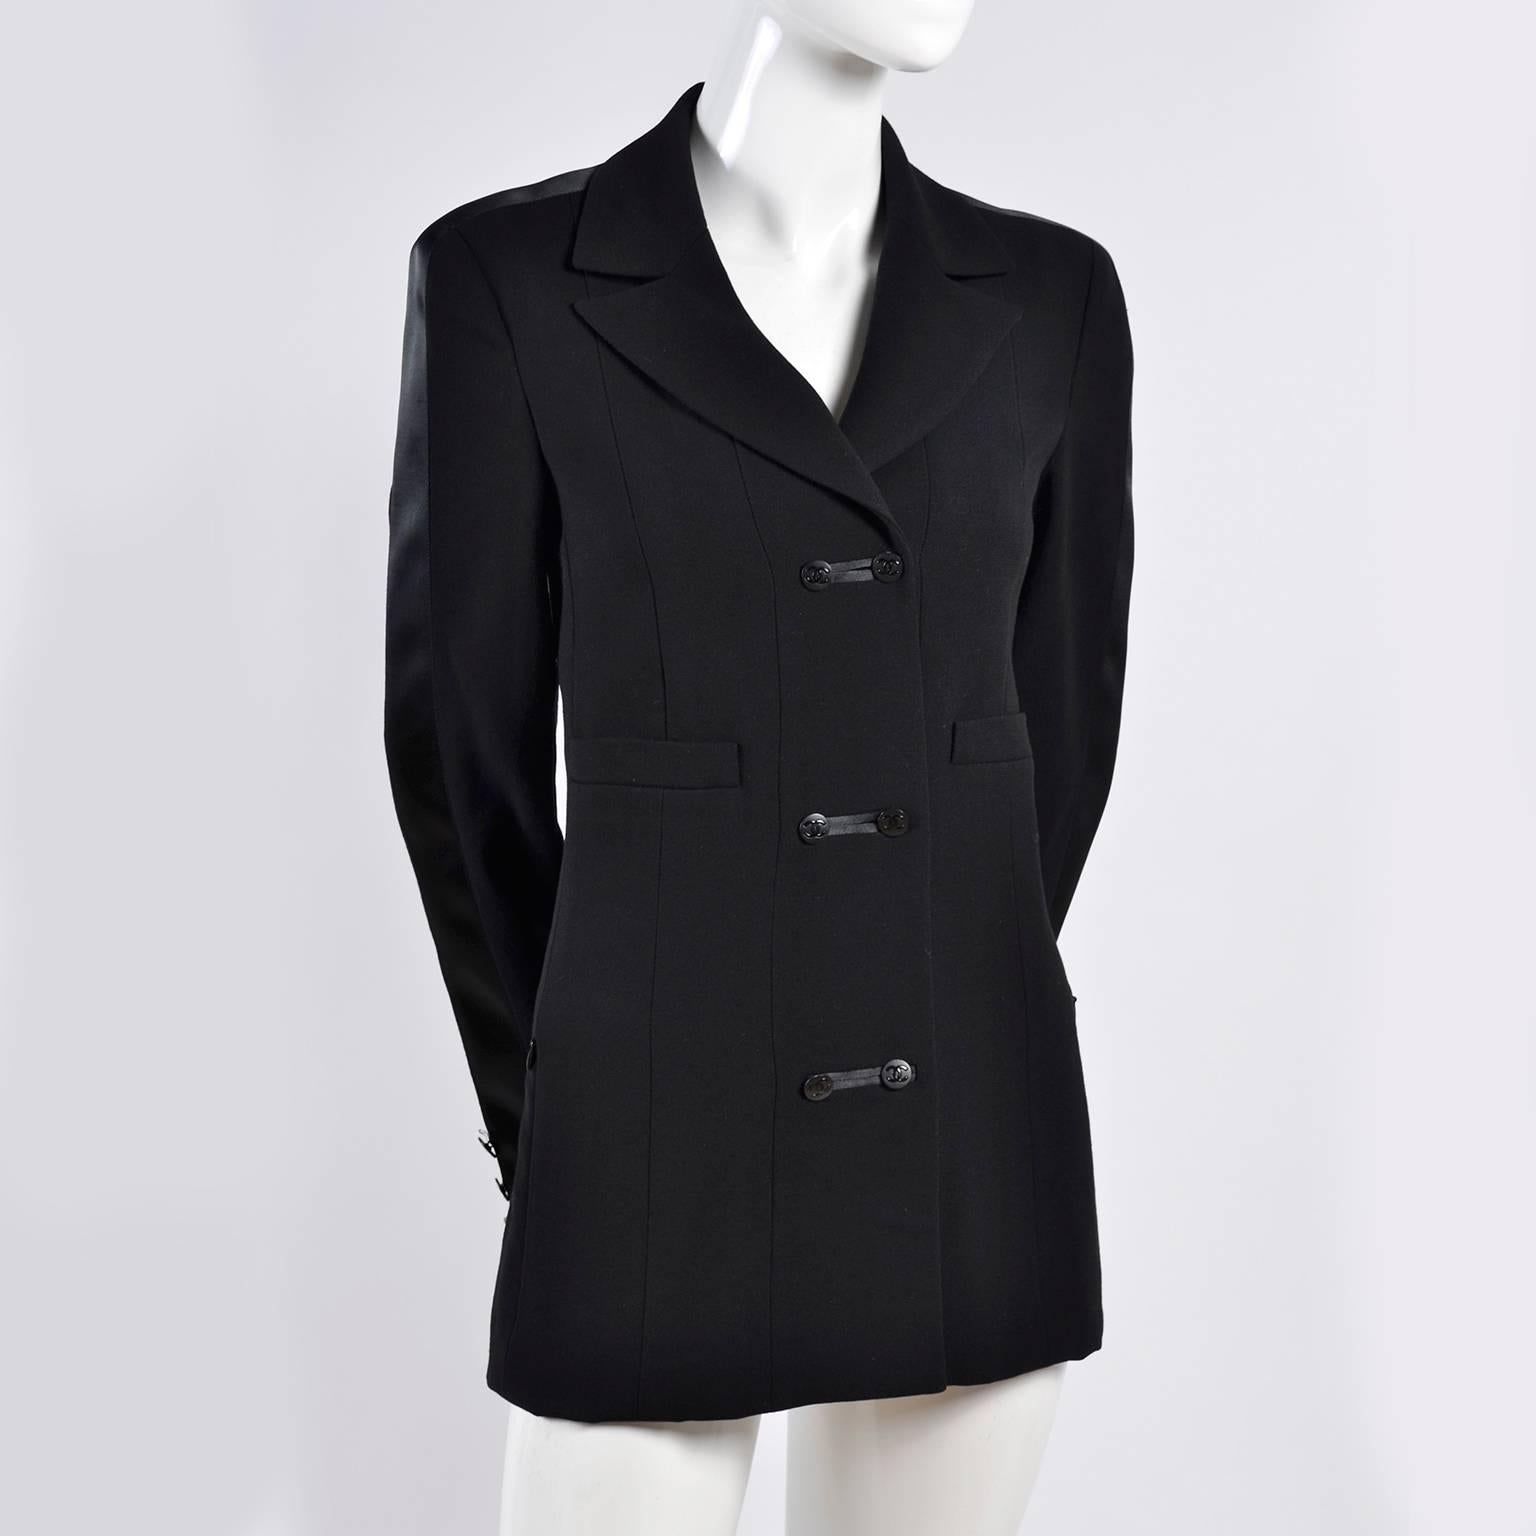 This is a beautiful Chanel Autumn 2003 black wool blazer with double breasted cc Logo buttons up the front, decorative pockets and functional slit zip front pockets. There is a wide satin stripe of fabric on each sleeve that runs up the shoulders to